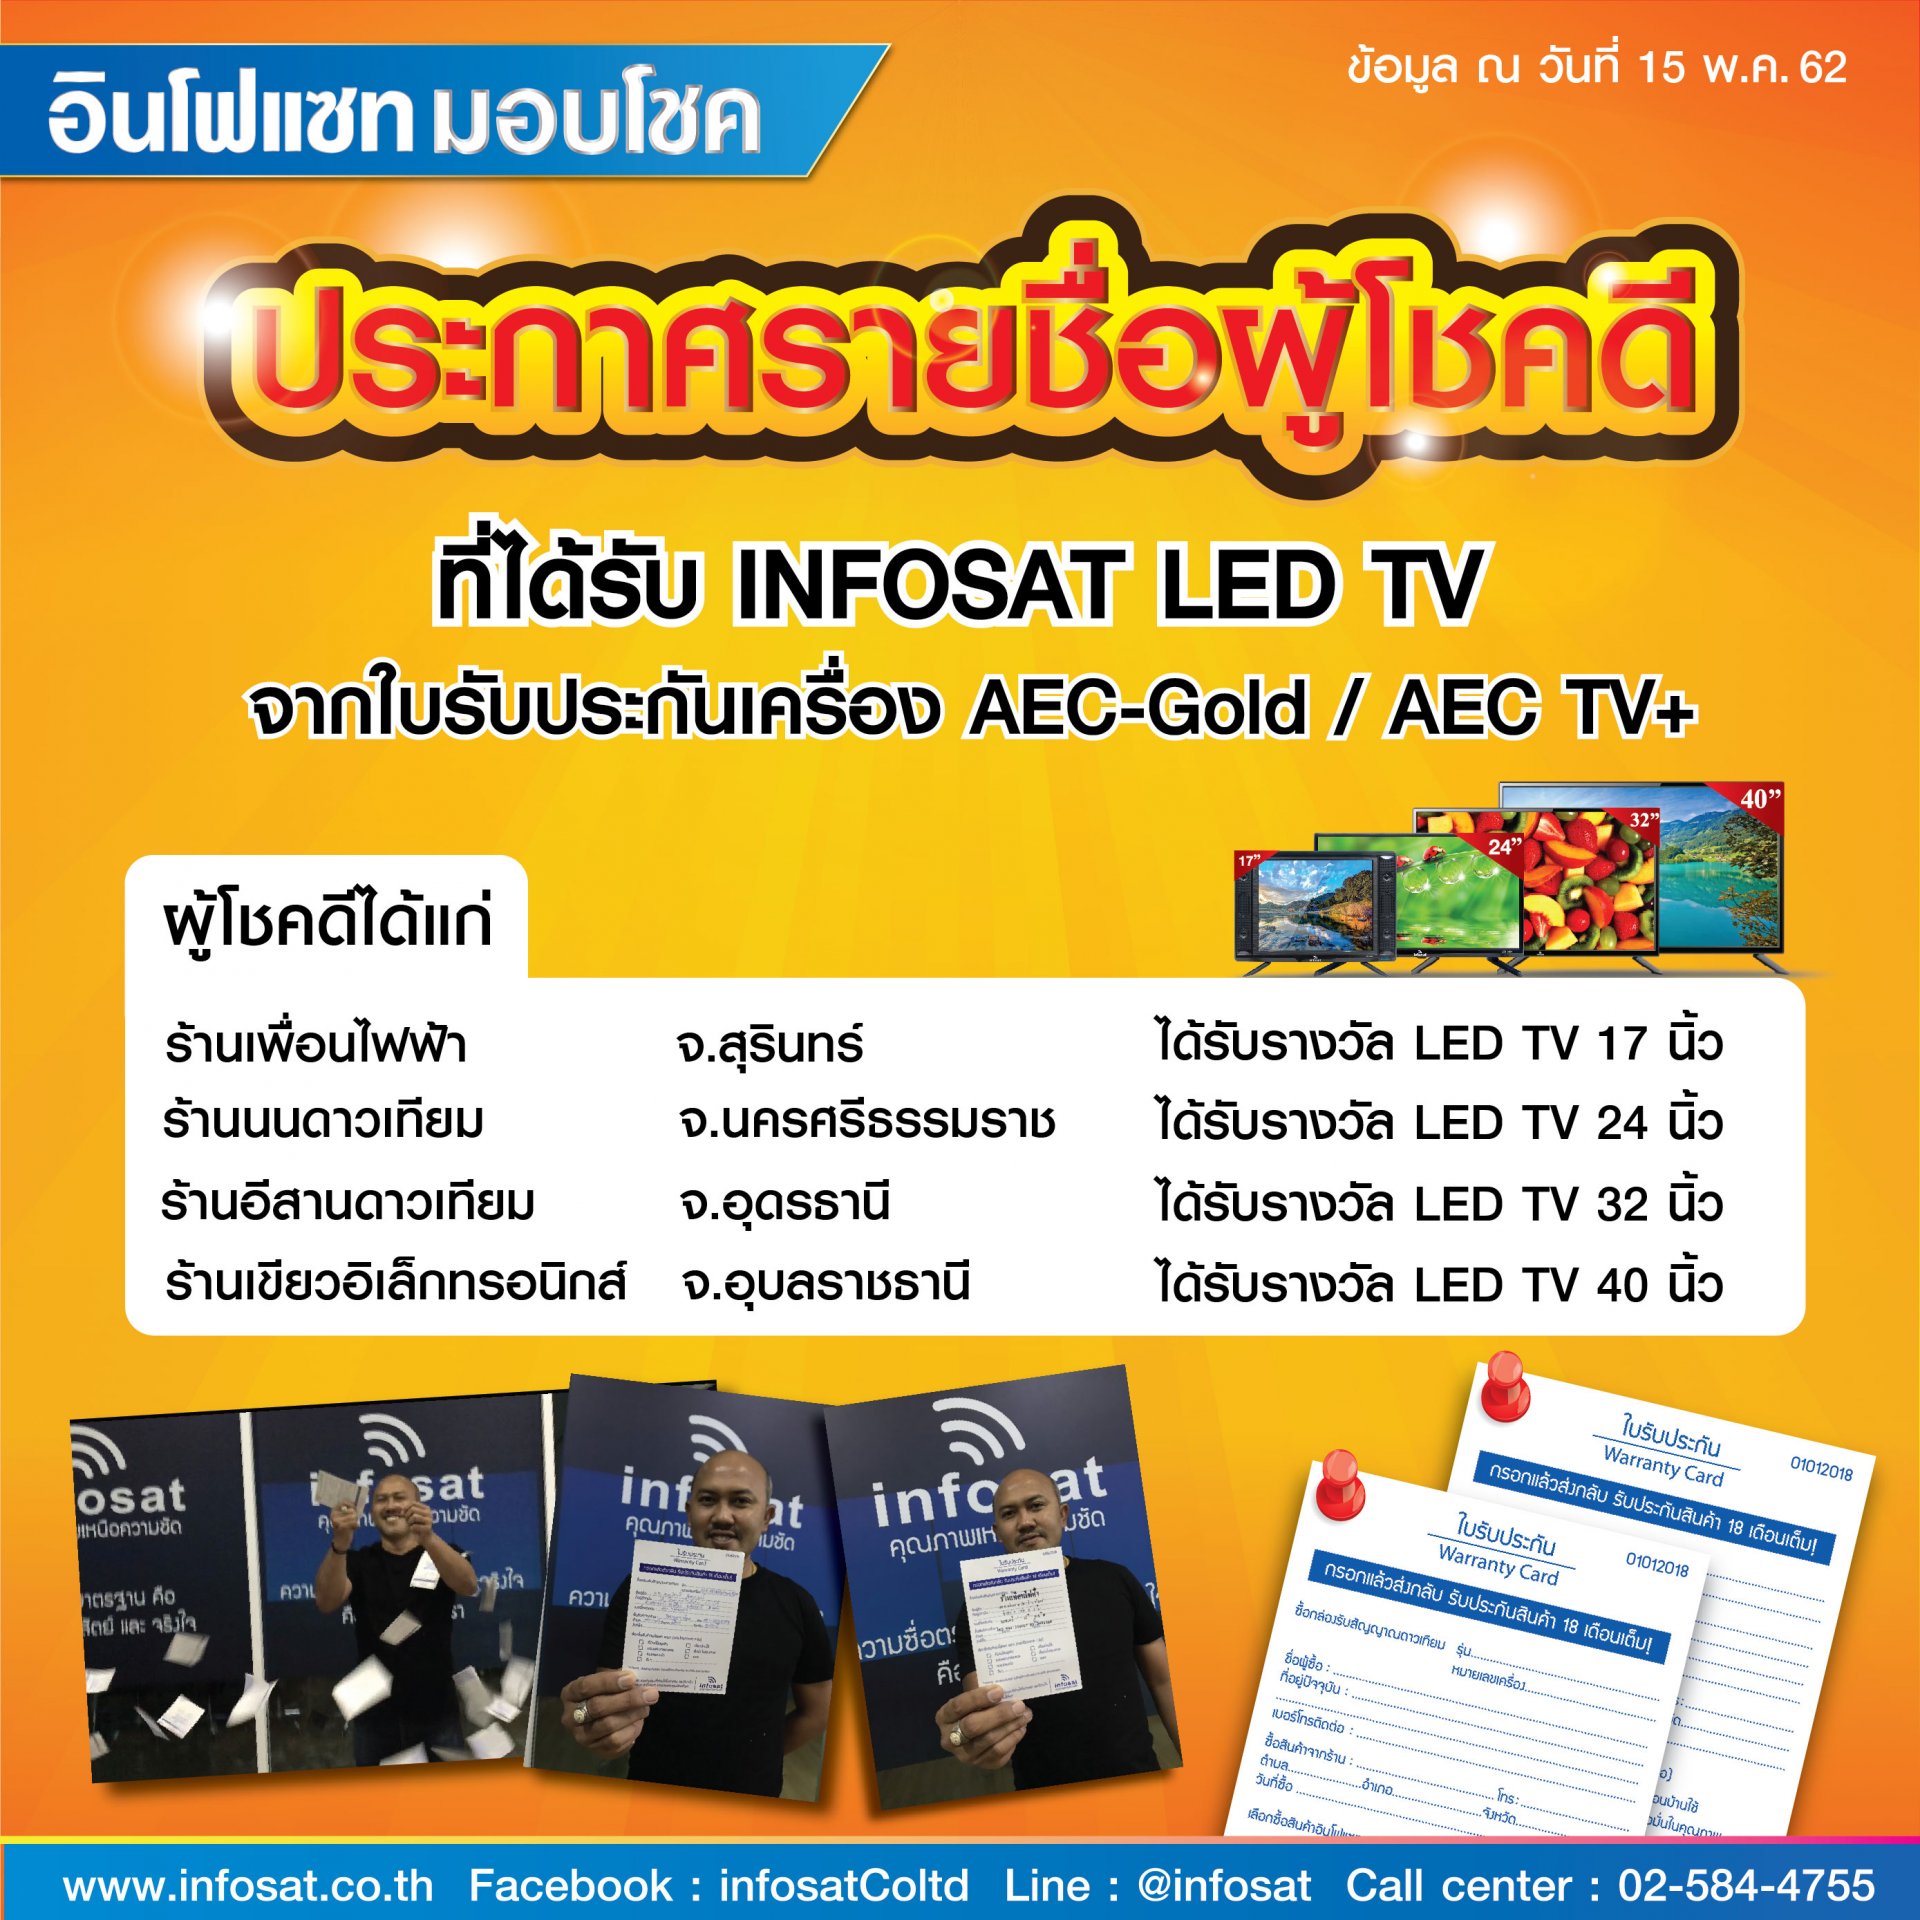 The lucky person who received the LED TV